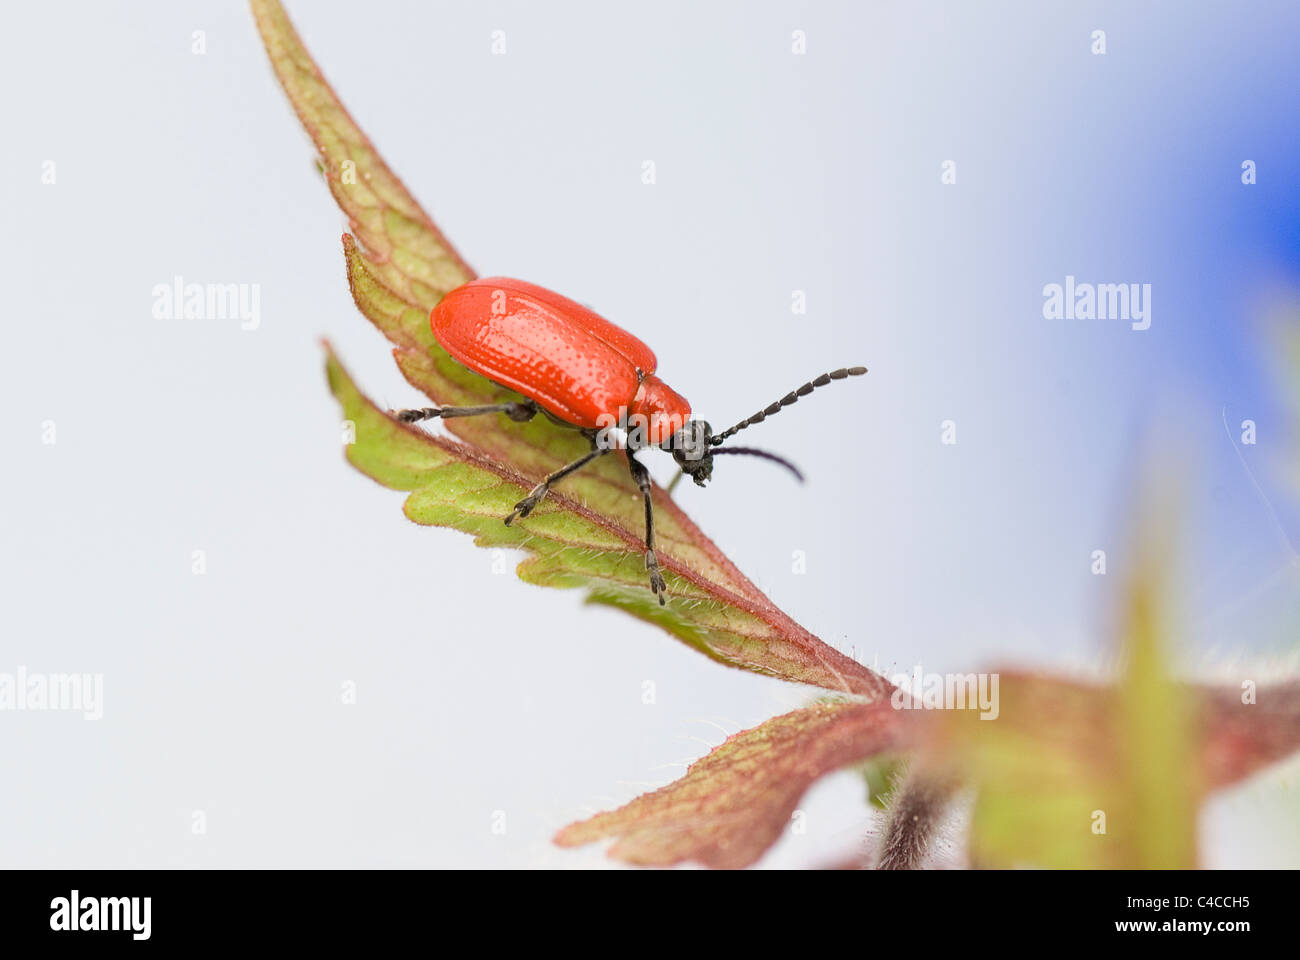 Red lily beetle on water avens Stock Photo